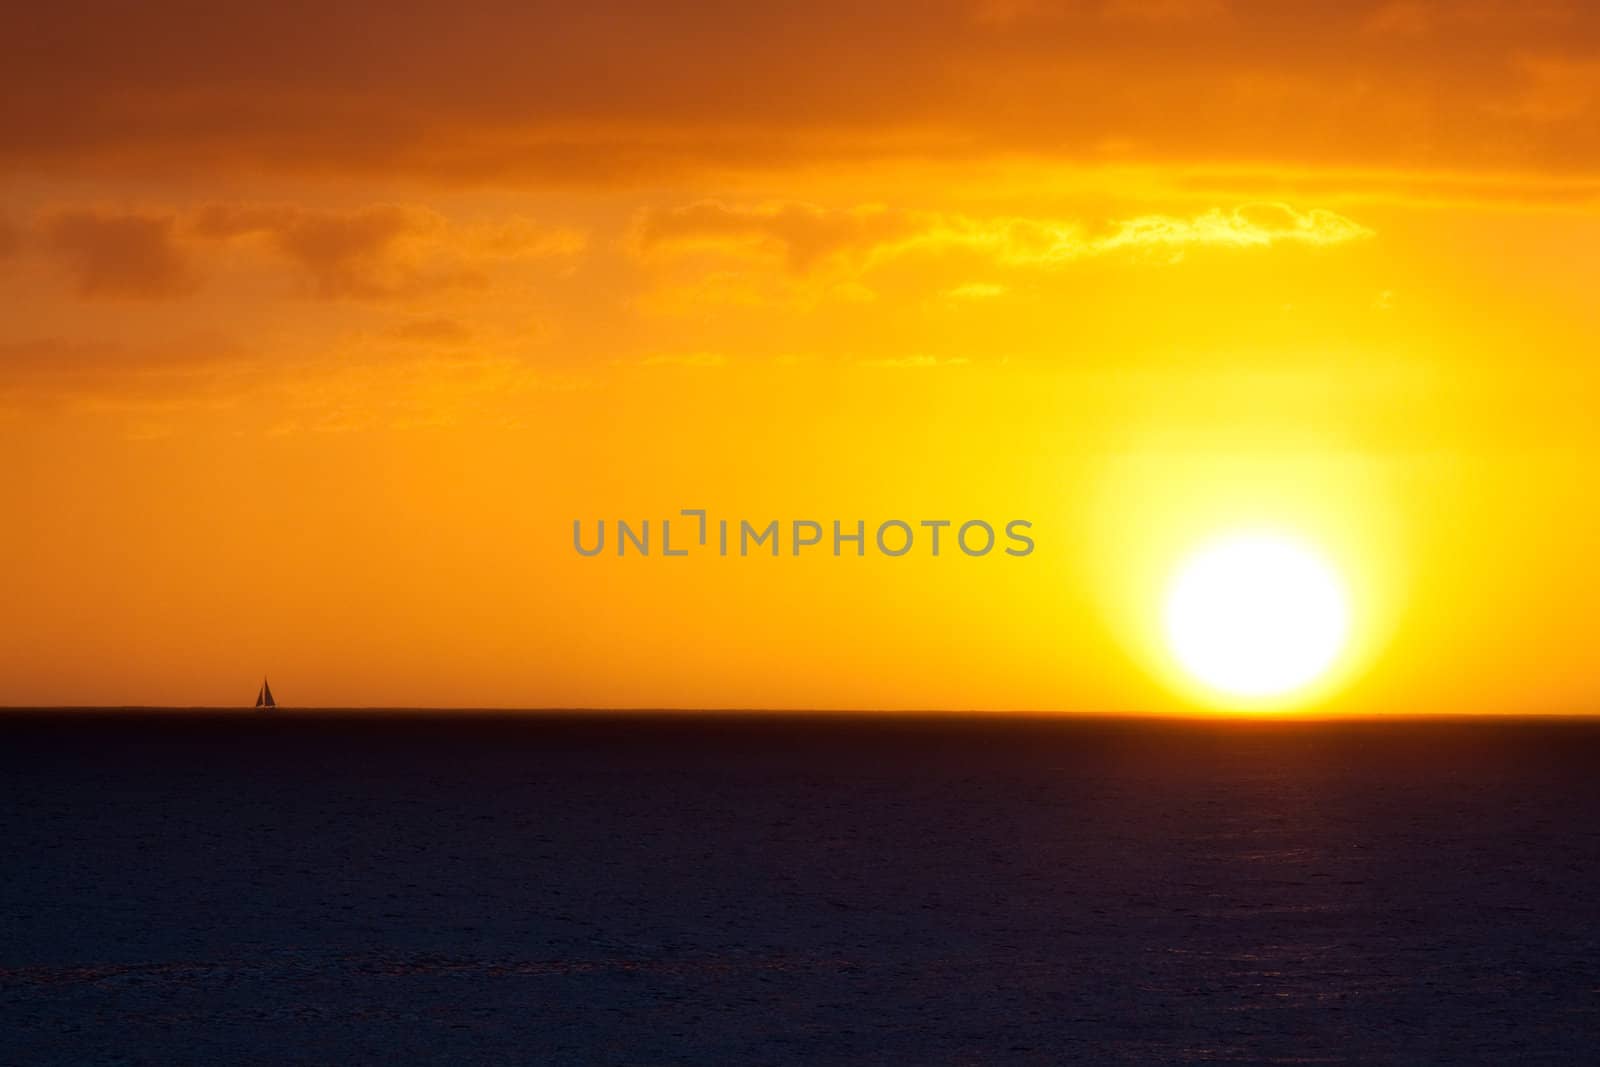 A sailboat sails offshore during a sunset in Oahu Hawaii along the north shore.